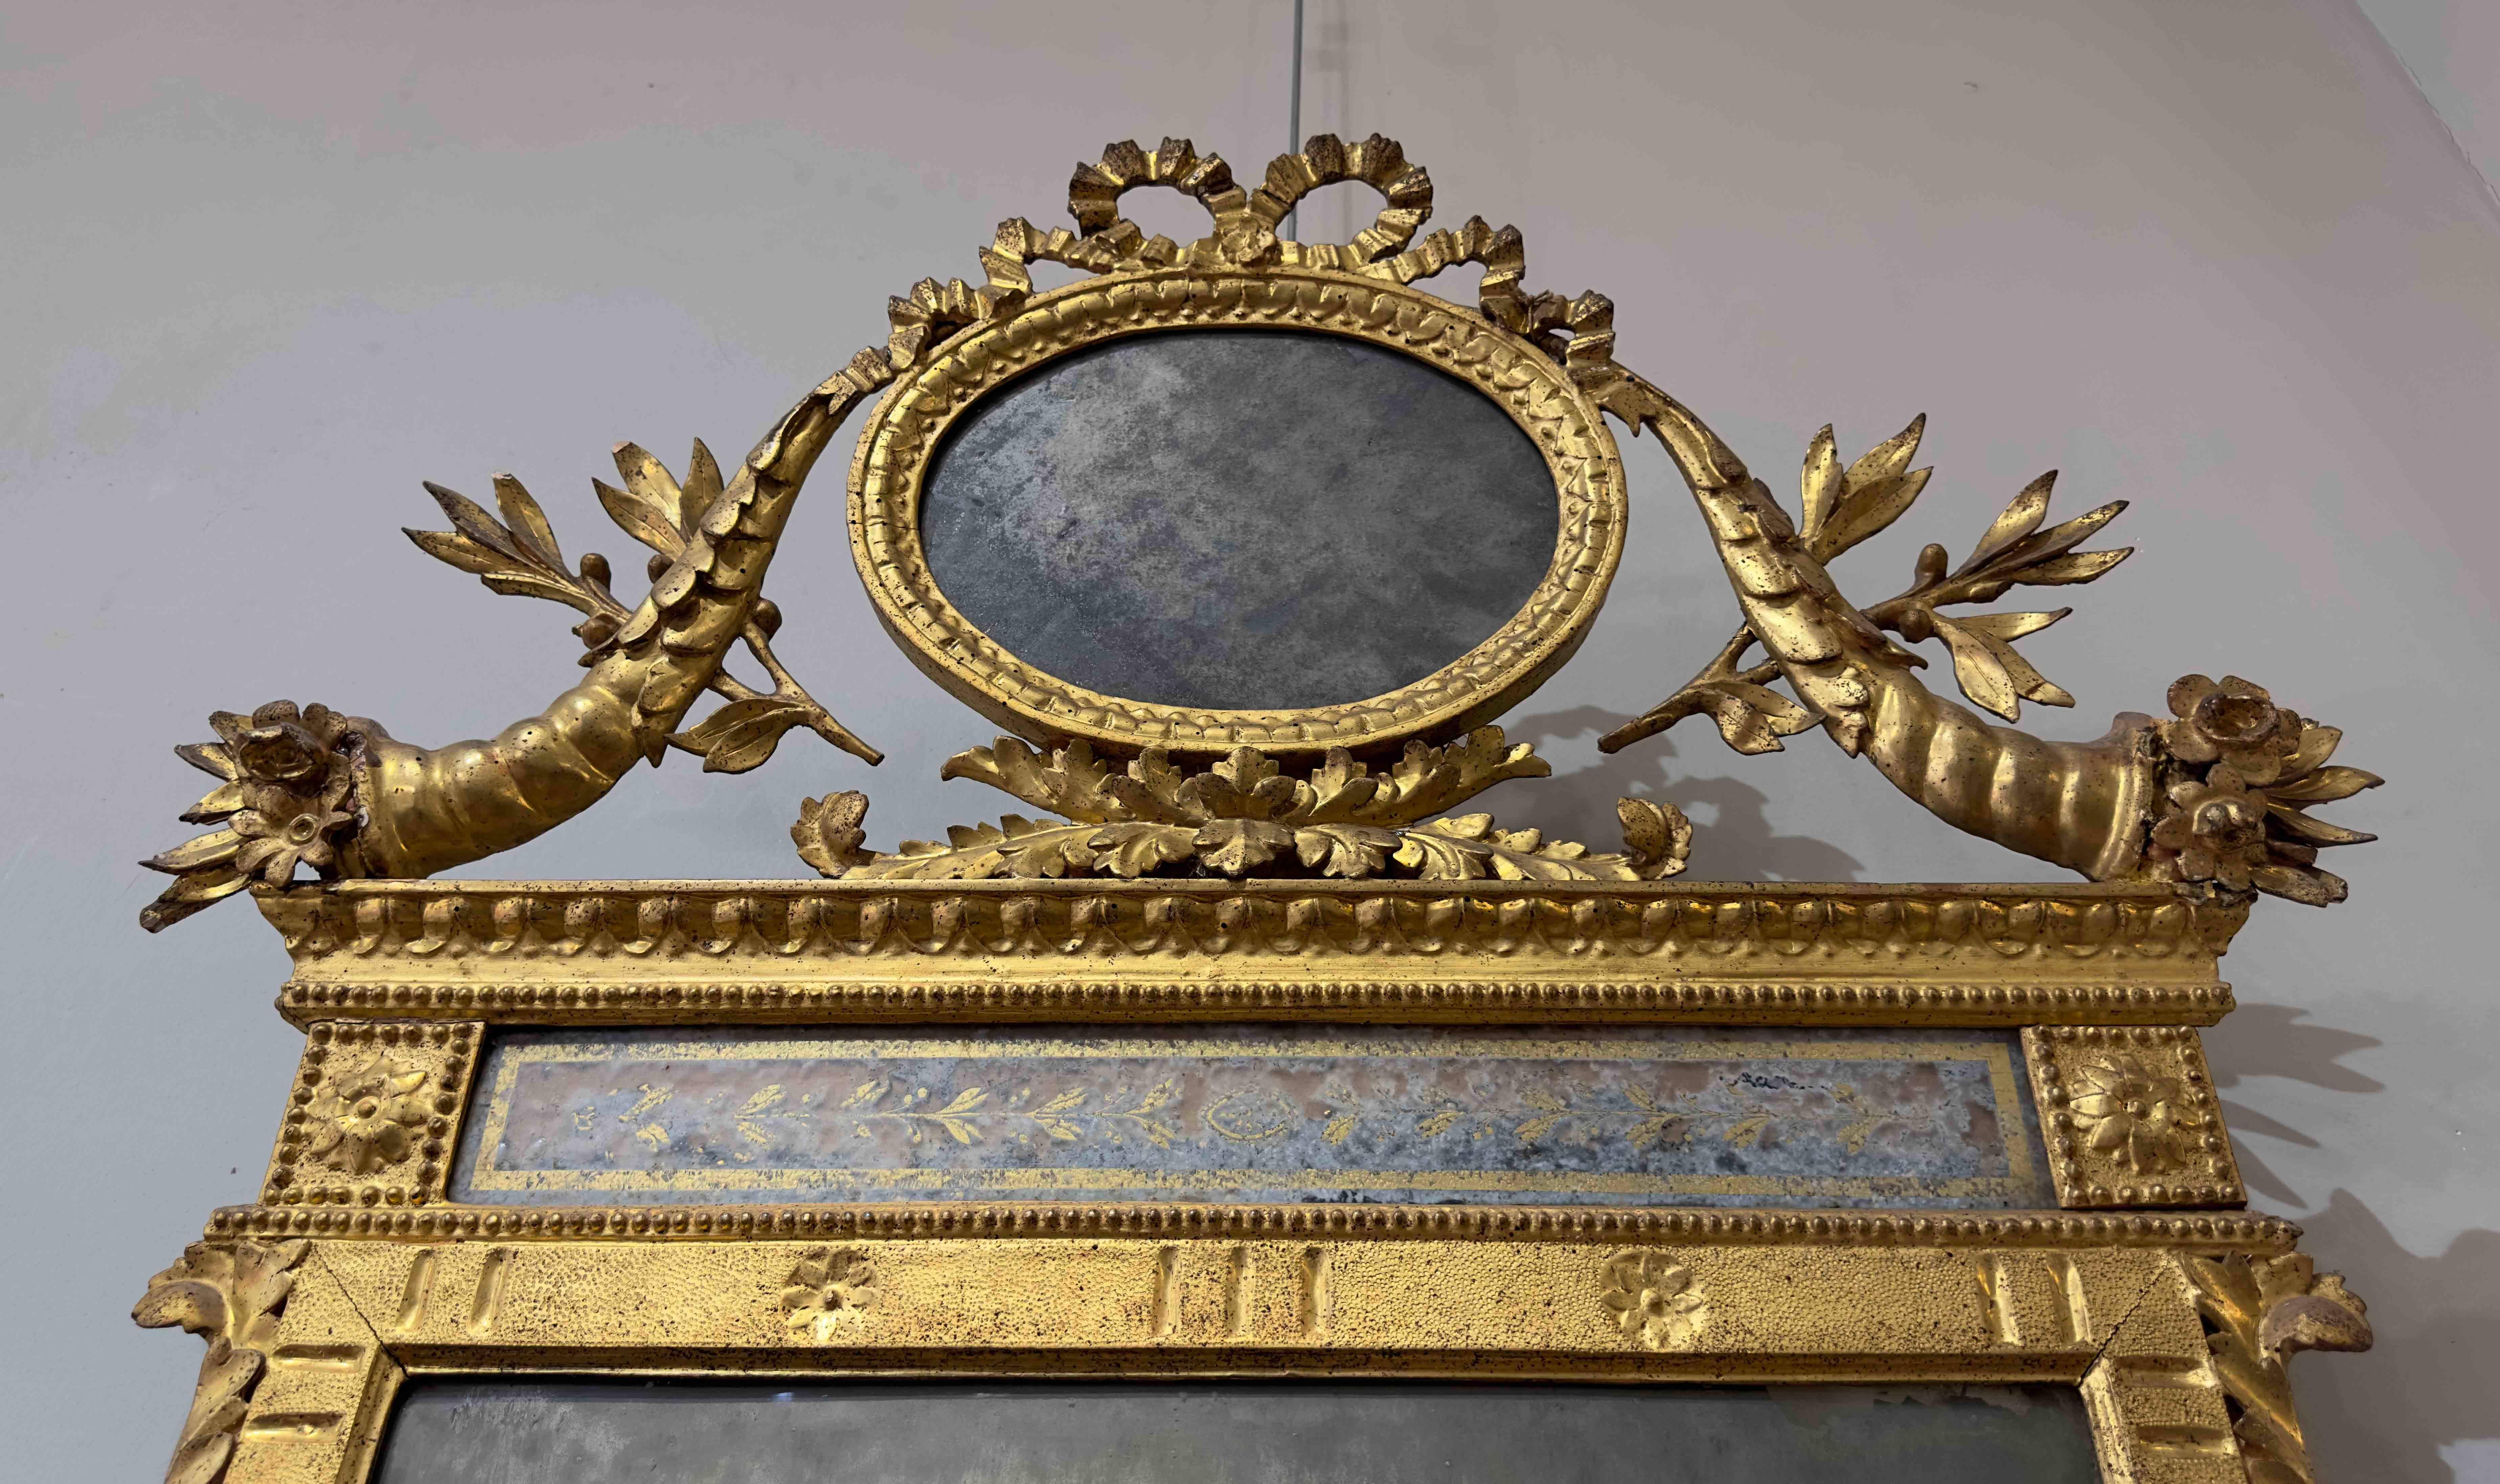 Italian END OF THE 18th CENTURY NEOCLASSICAL MIRROR WITH CORNUCOPIAS AND OLIVE BRANCHES 